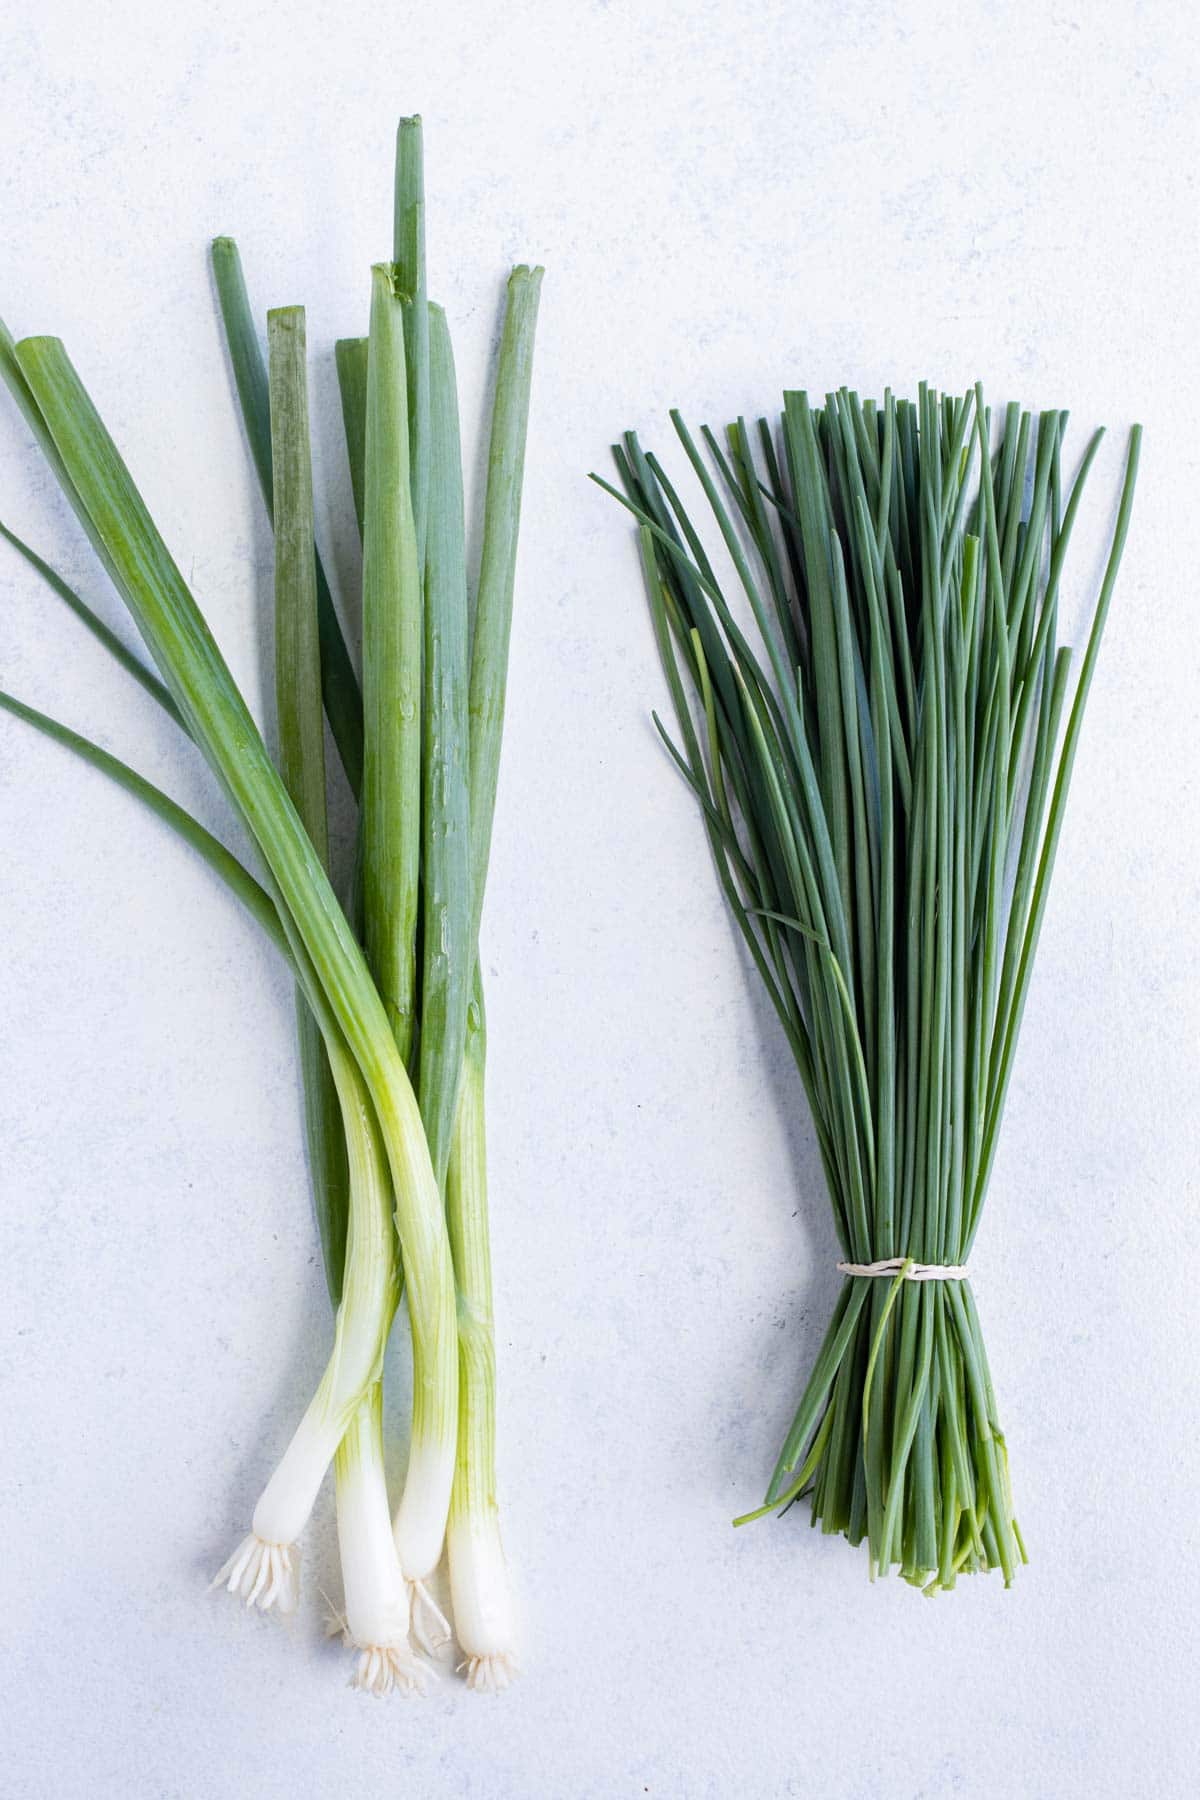 Chives are shown beside a bunch of green onions.